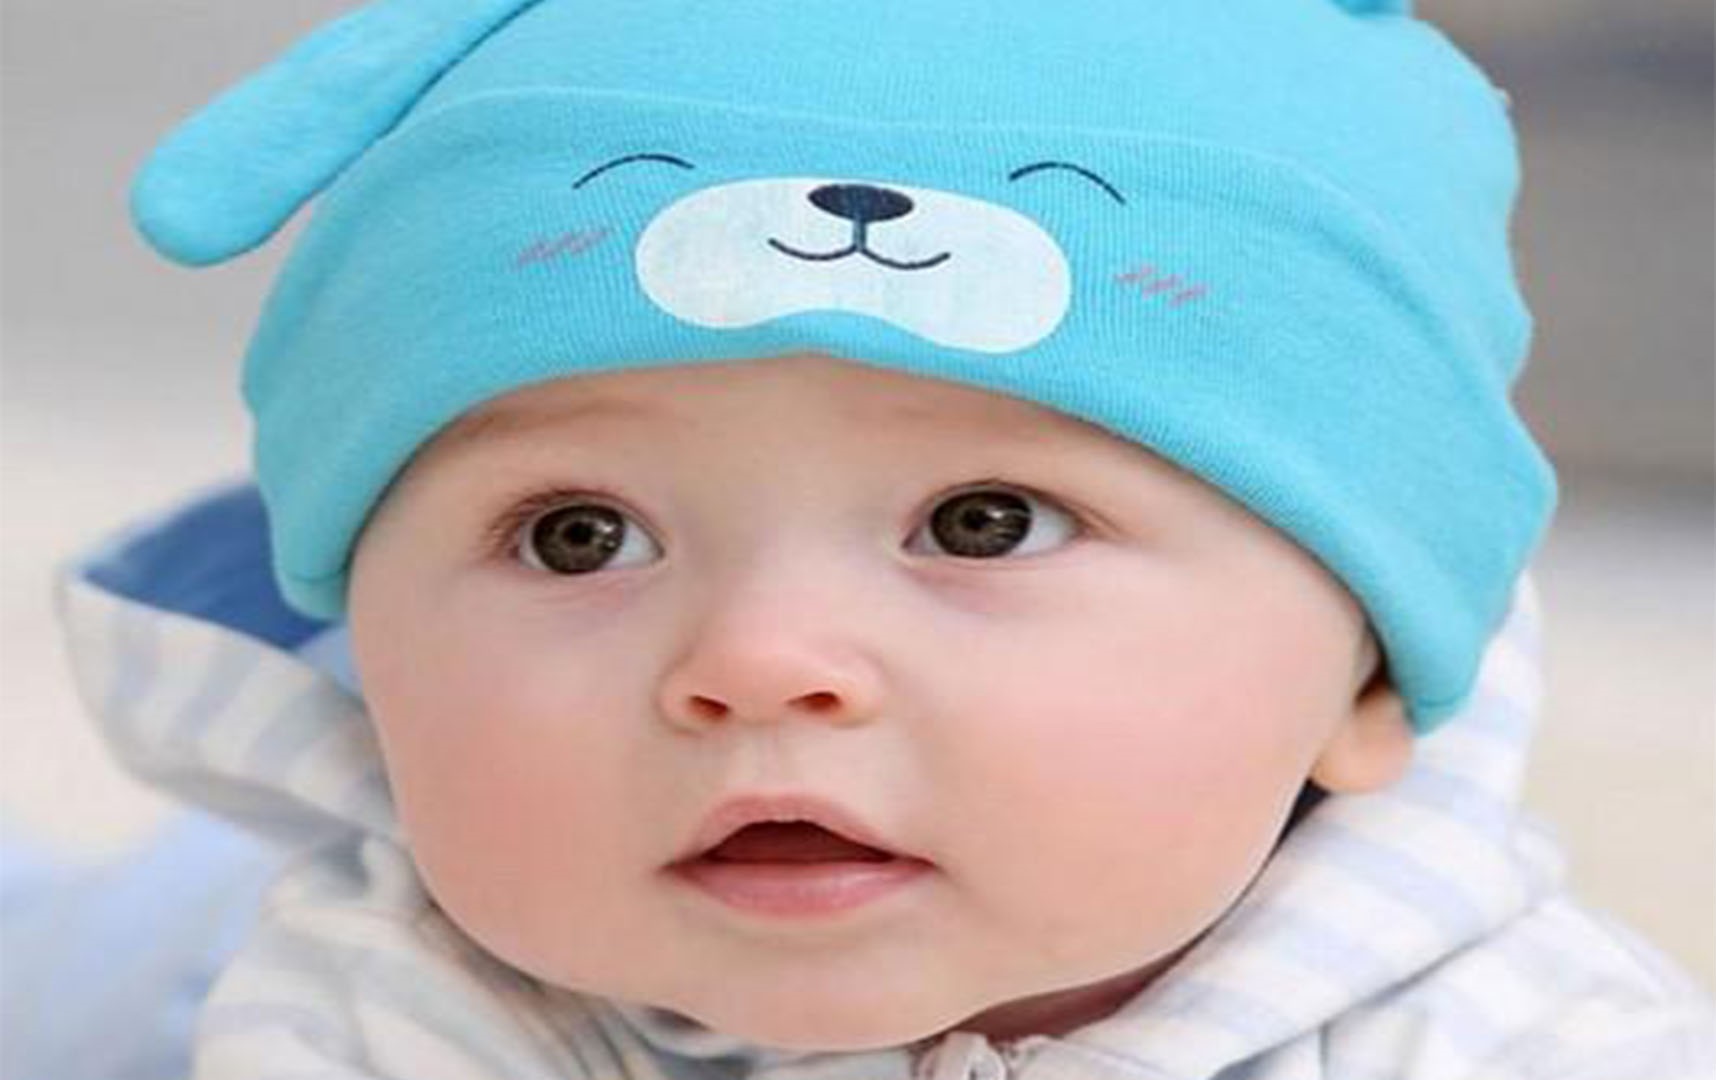 Cute Baby HD Images, Pics & Wallpapers | Cute Profile Images